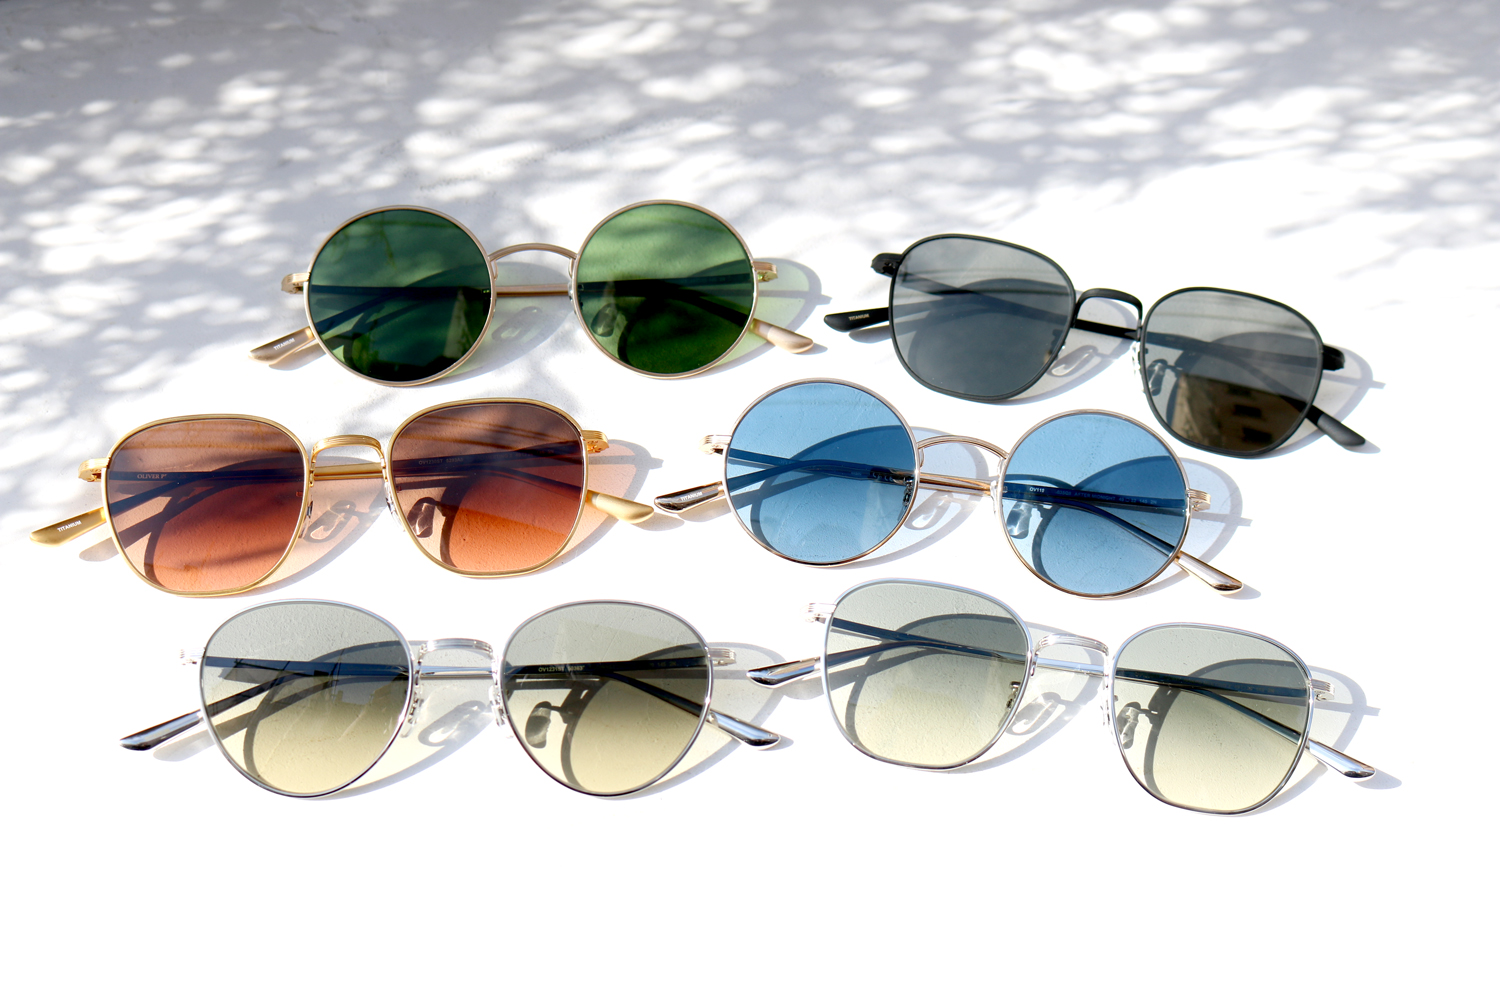 OLIVE☆新品☆オリバーピープルズ☆OLIVER PEOPLES☆THE ROW☆